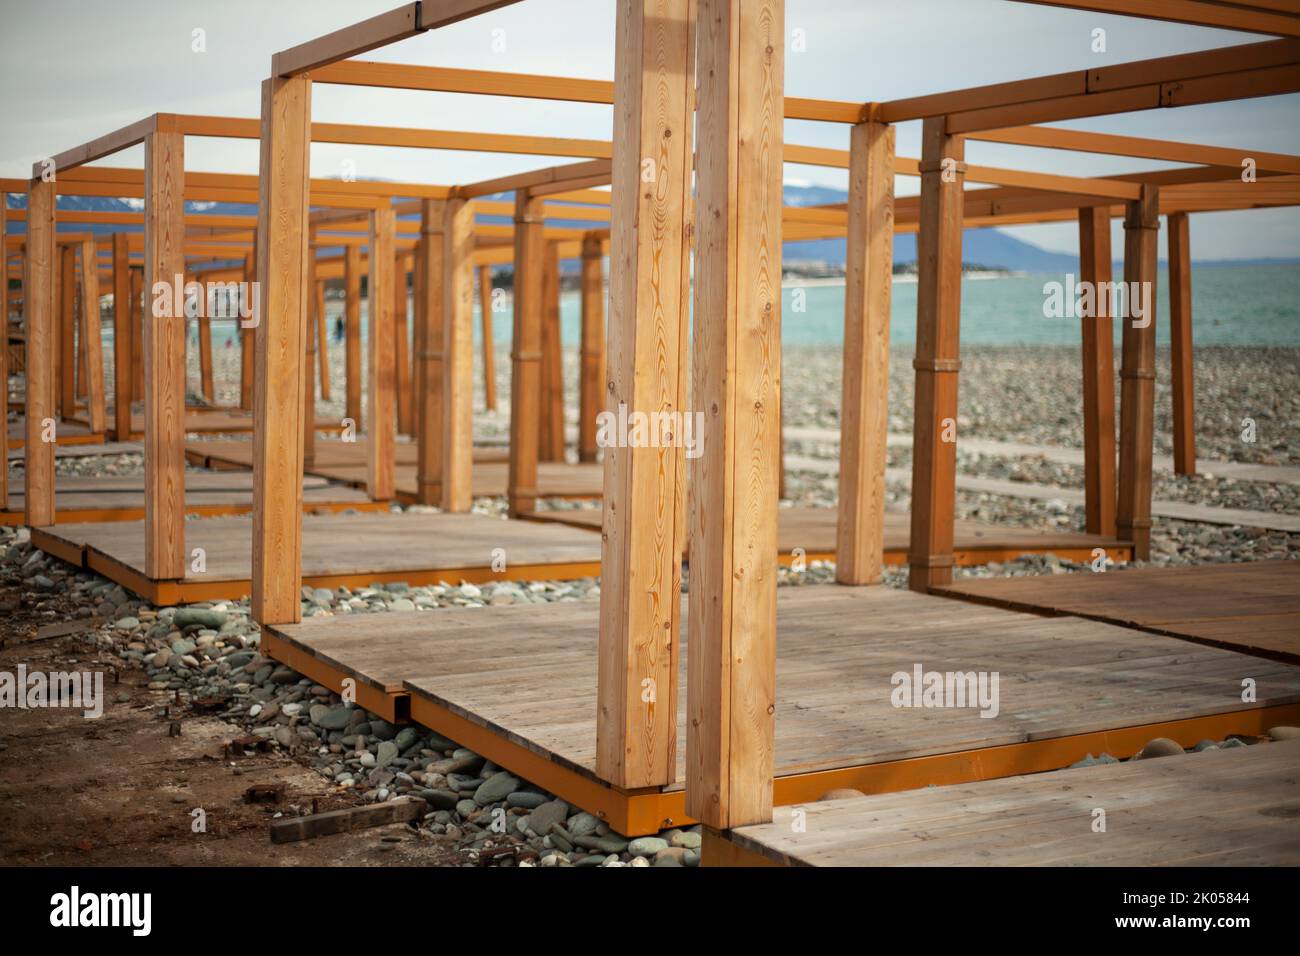 Construction of fair on embankment. Wooden construction of boards. Repair of market in city on seashore. Stock Photo